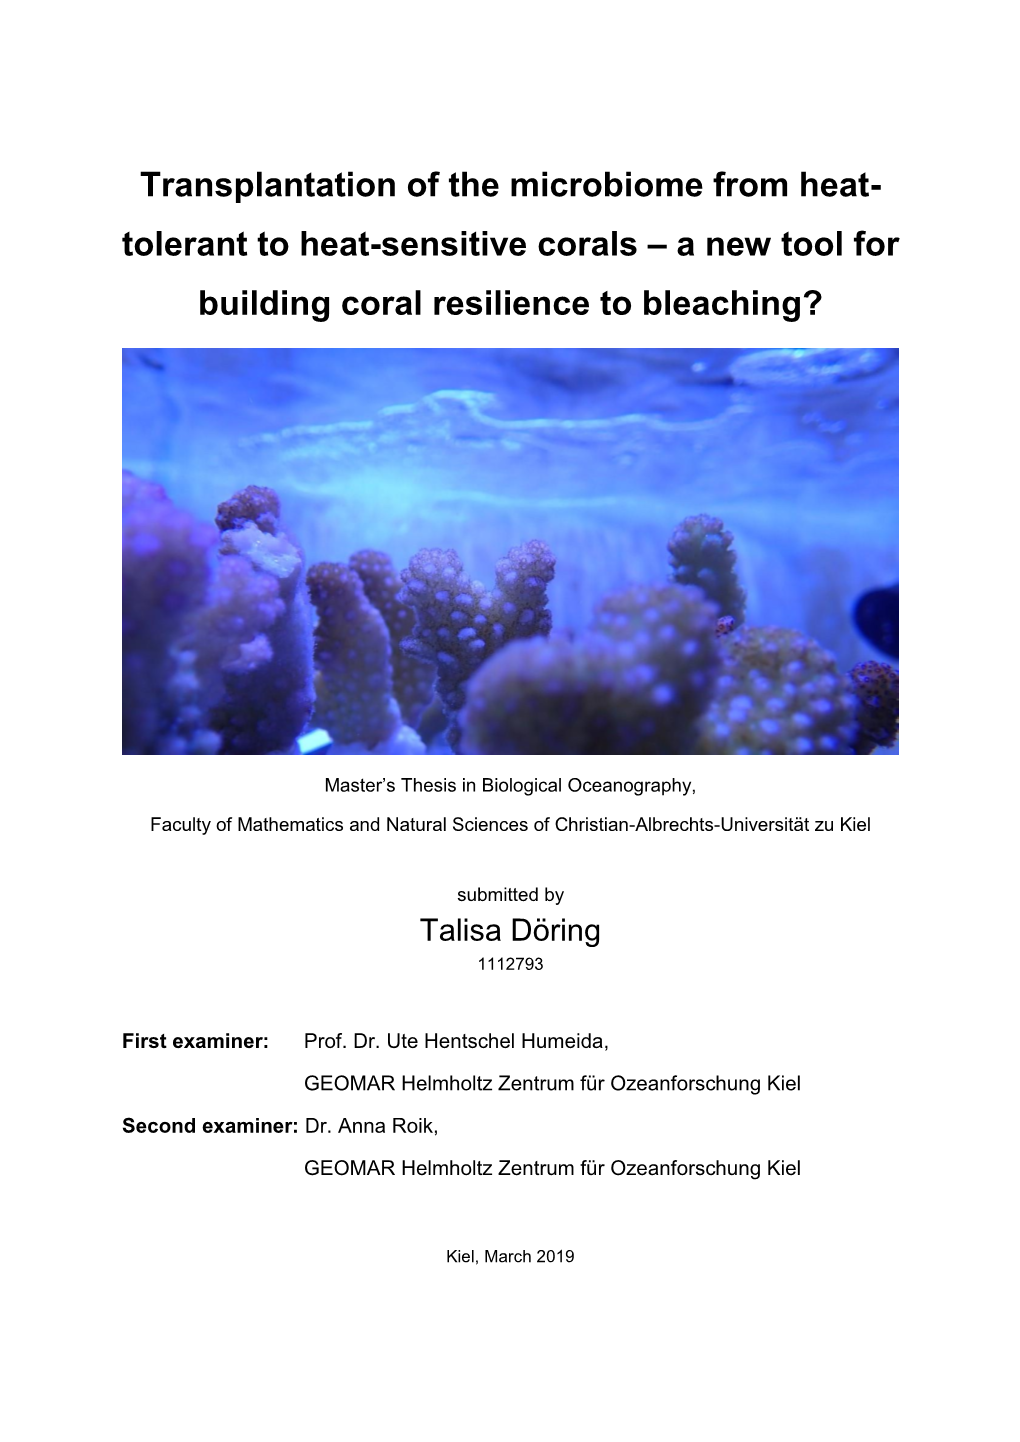 Transplantation of the Microbiome from Heat- Tolerant to Heat-Sensitive Corals – a New Tool for Building Coral Resilience to Bleaching?